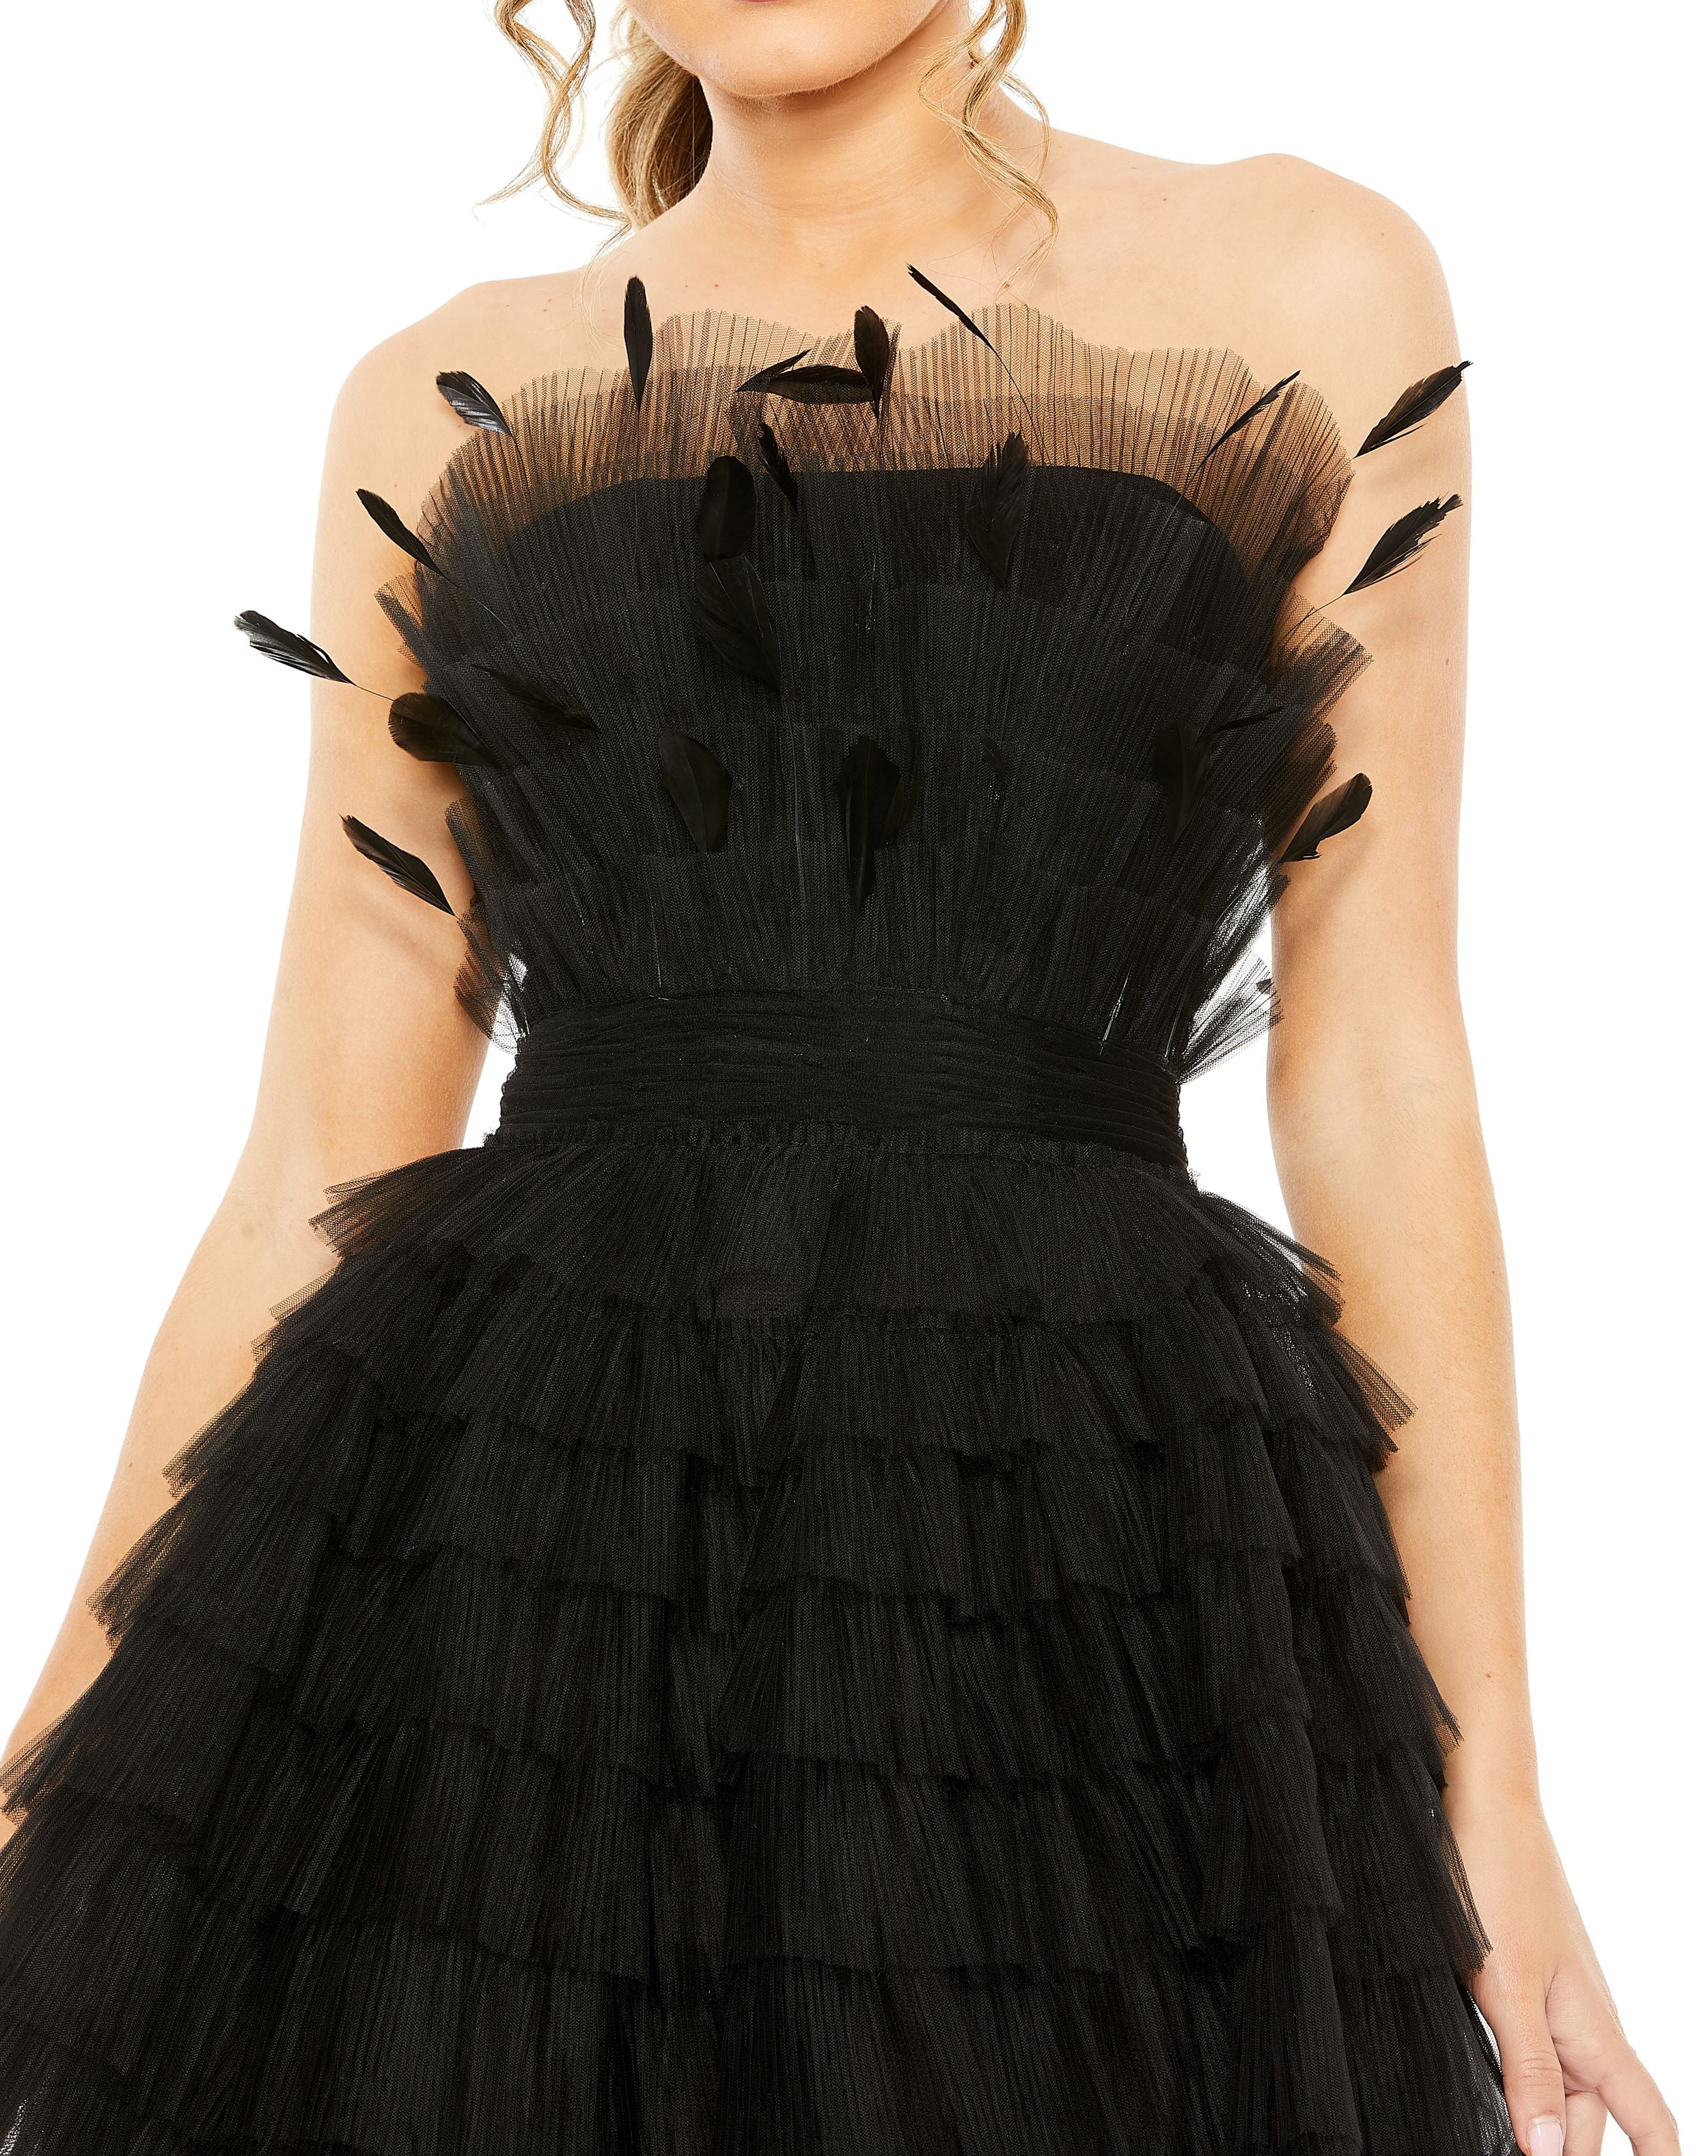 Feathered Strapless Tulle Fit and Flare Dress